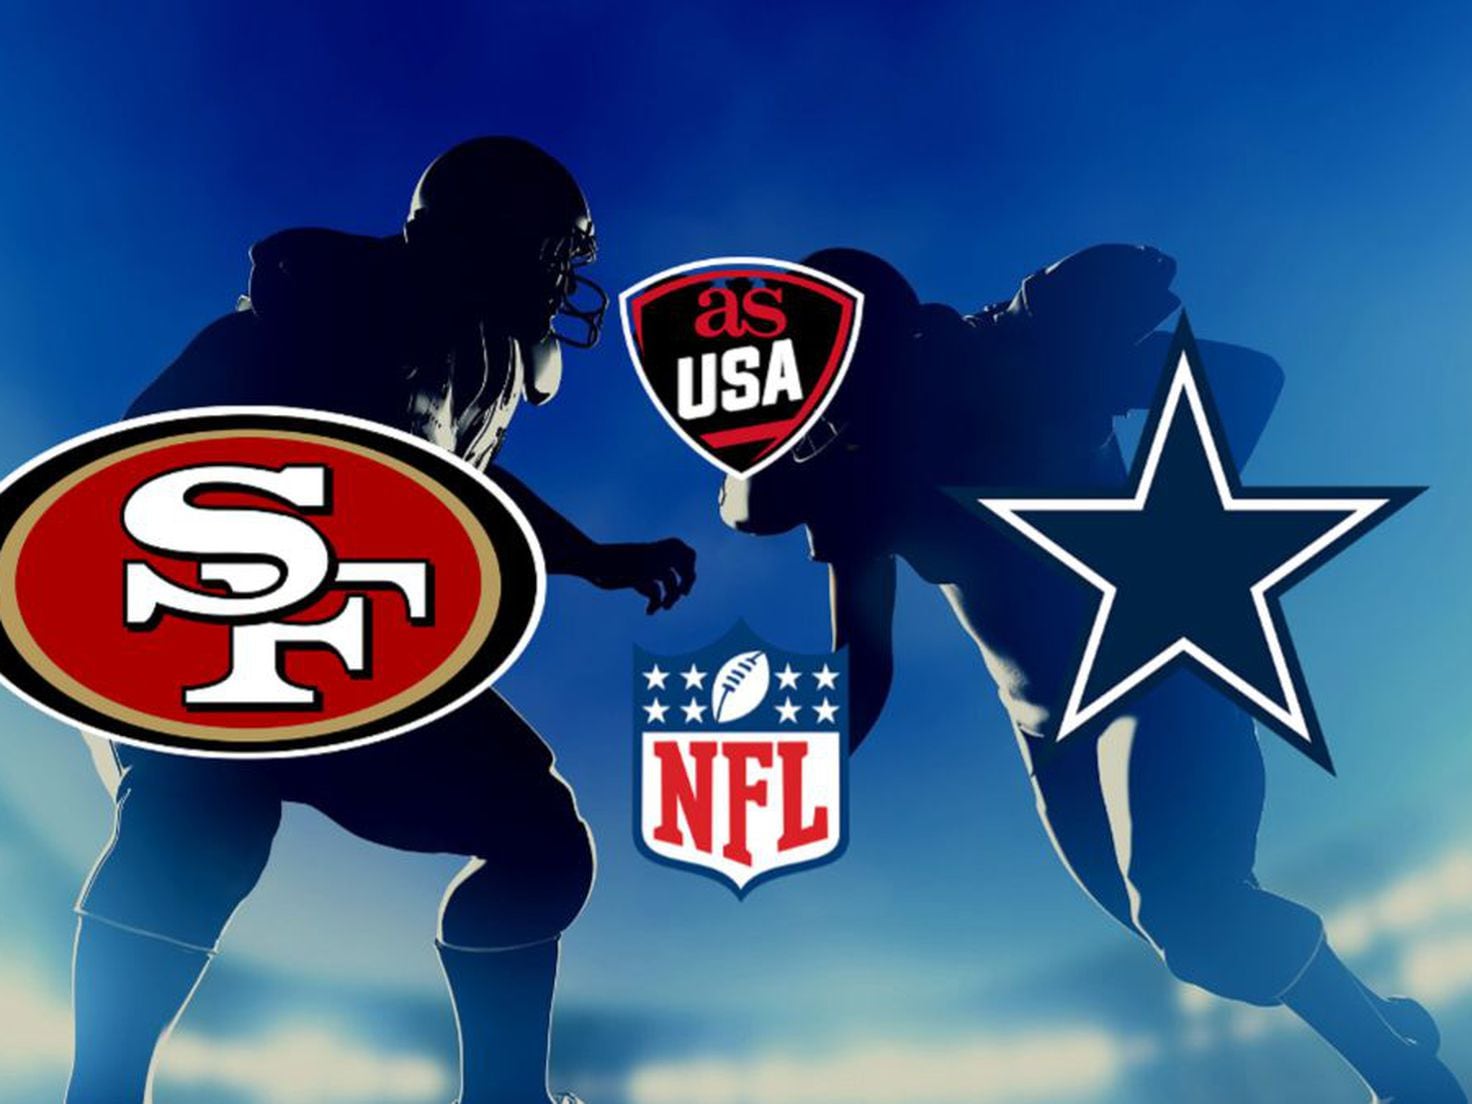 when are the 49ers and cowboys playing